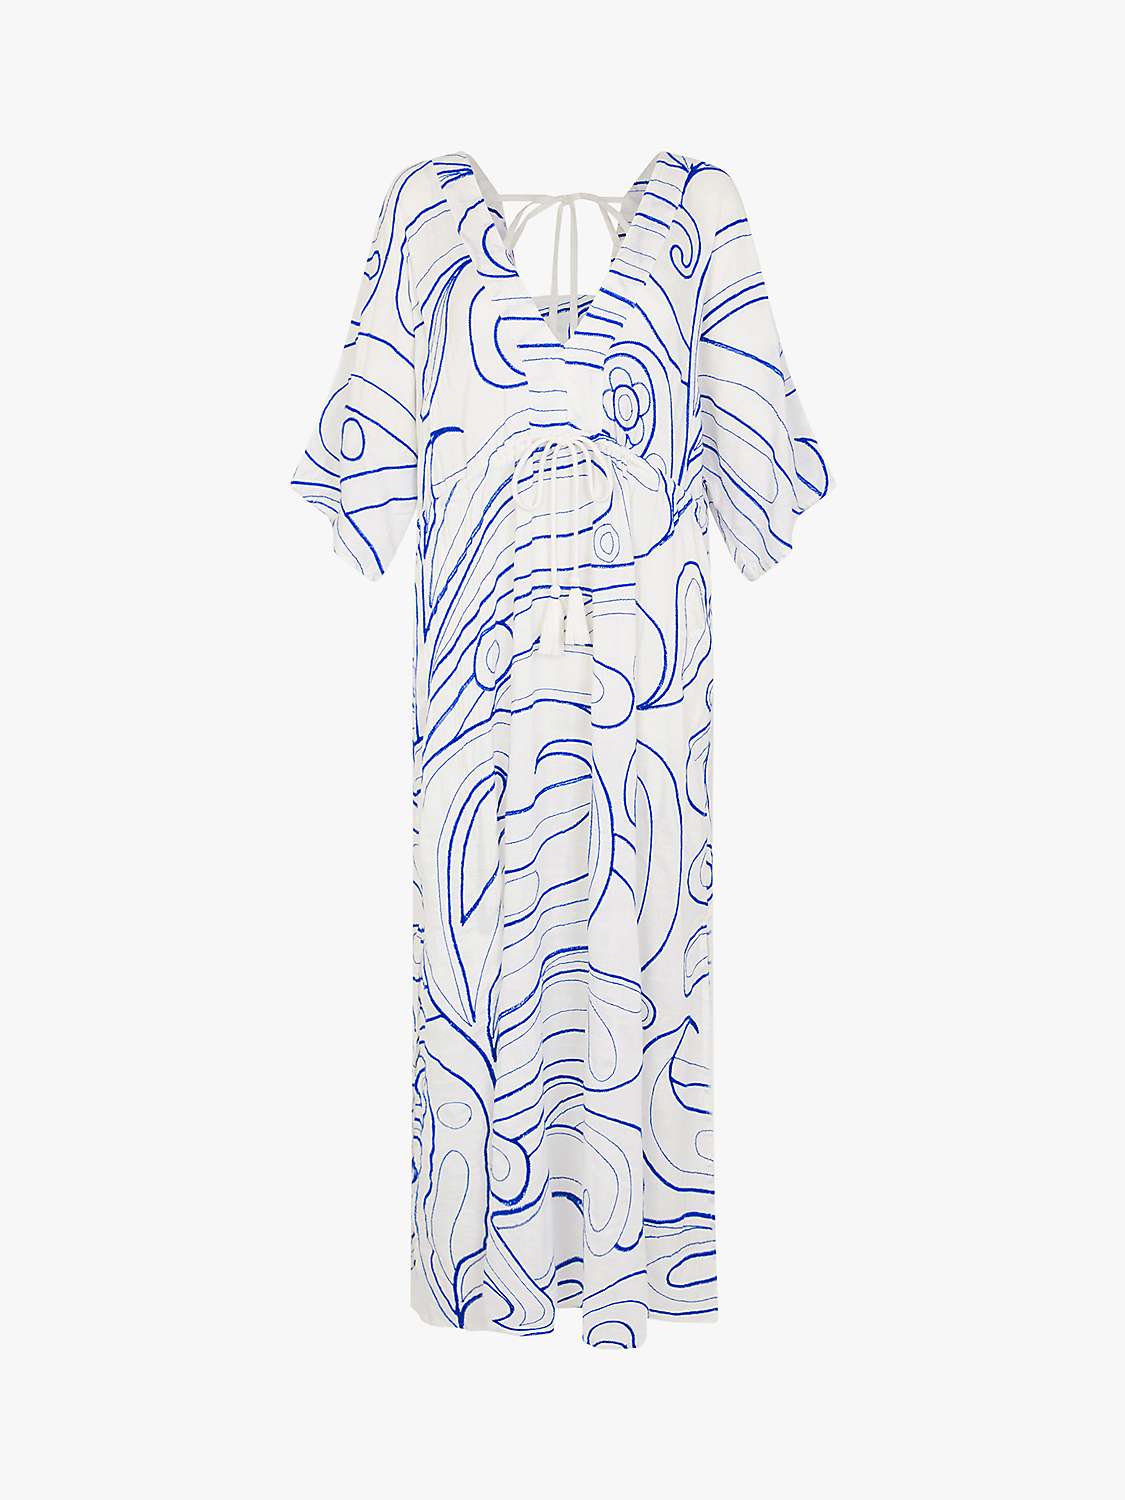 Buy Accessorize Embroidered Swirl Maxi Dress, White/Blue Online at johnlewis.com